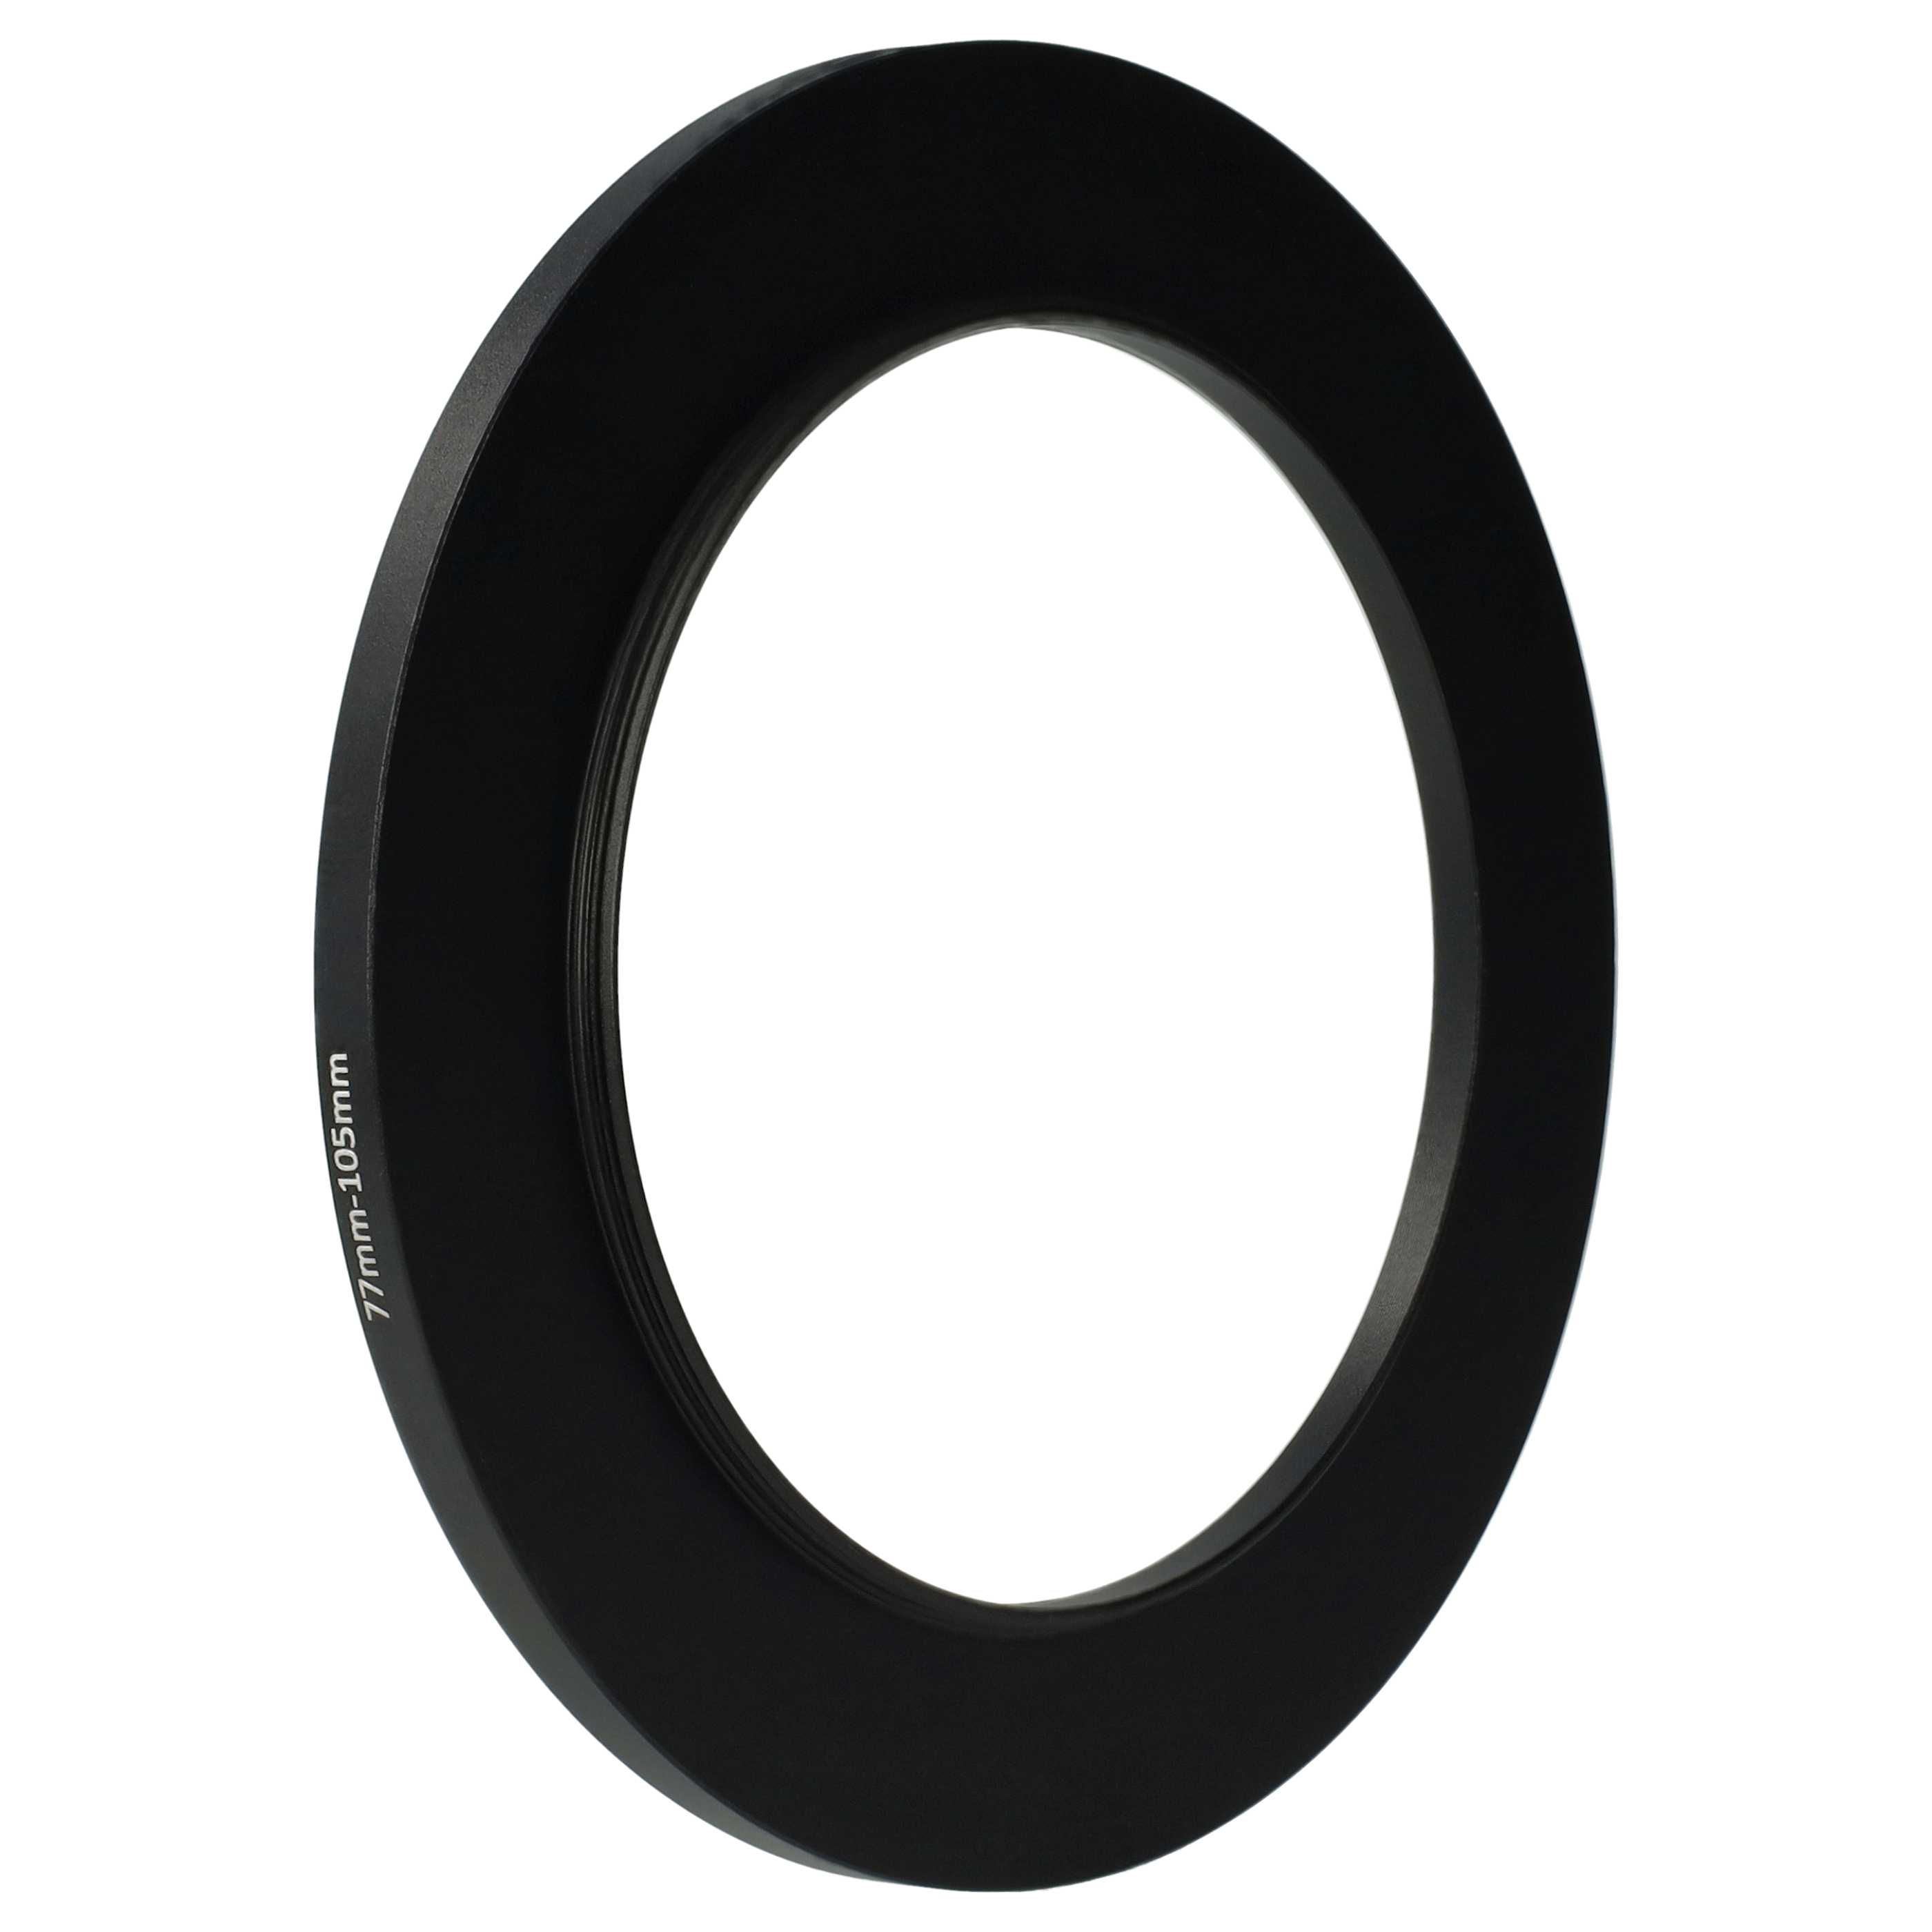 Step-Up Ring Adapter of 77 mm to 105 mmfor various Camera Lens - Filter Adapter